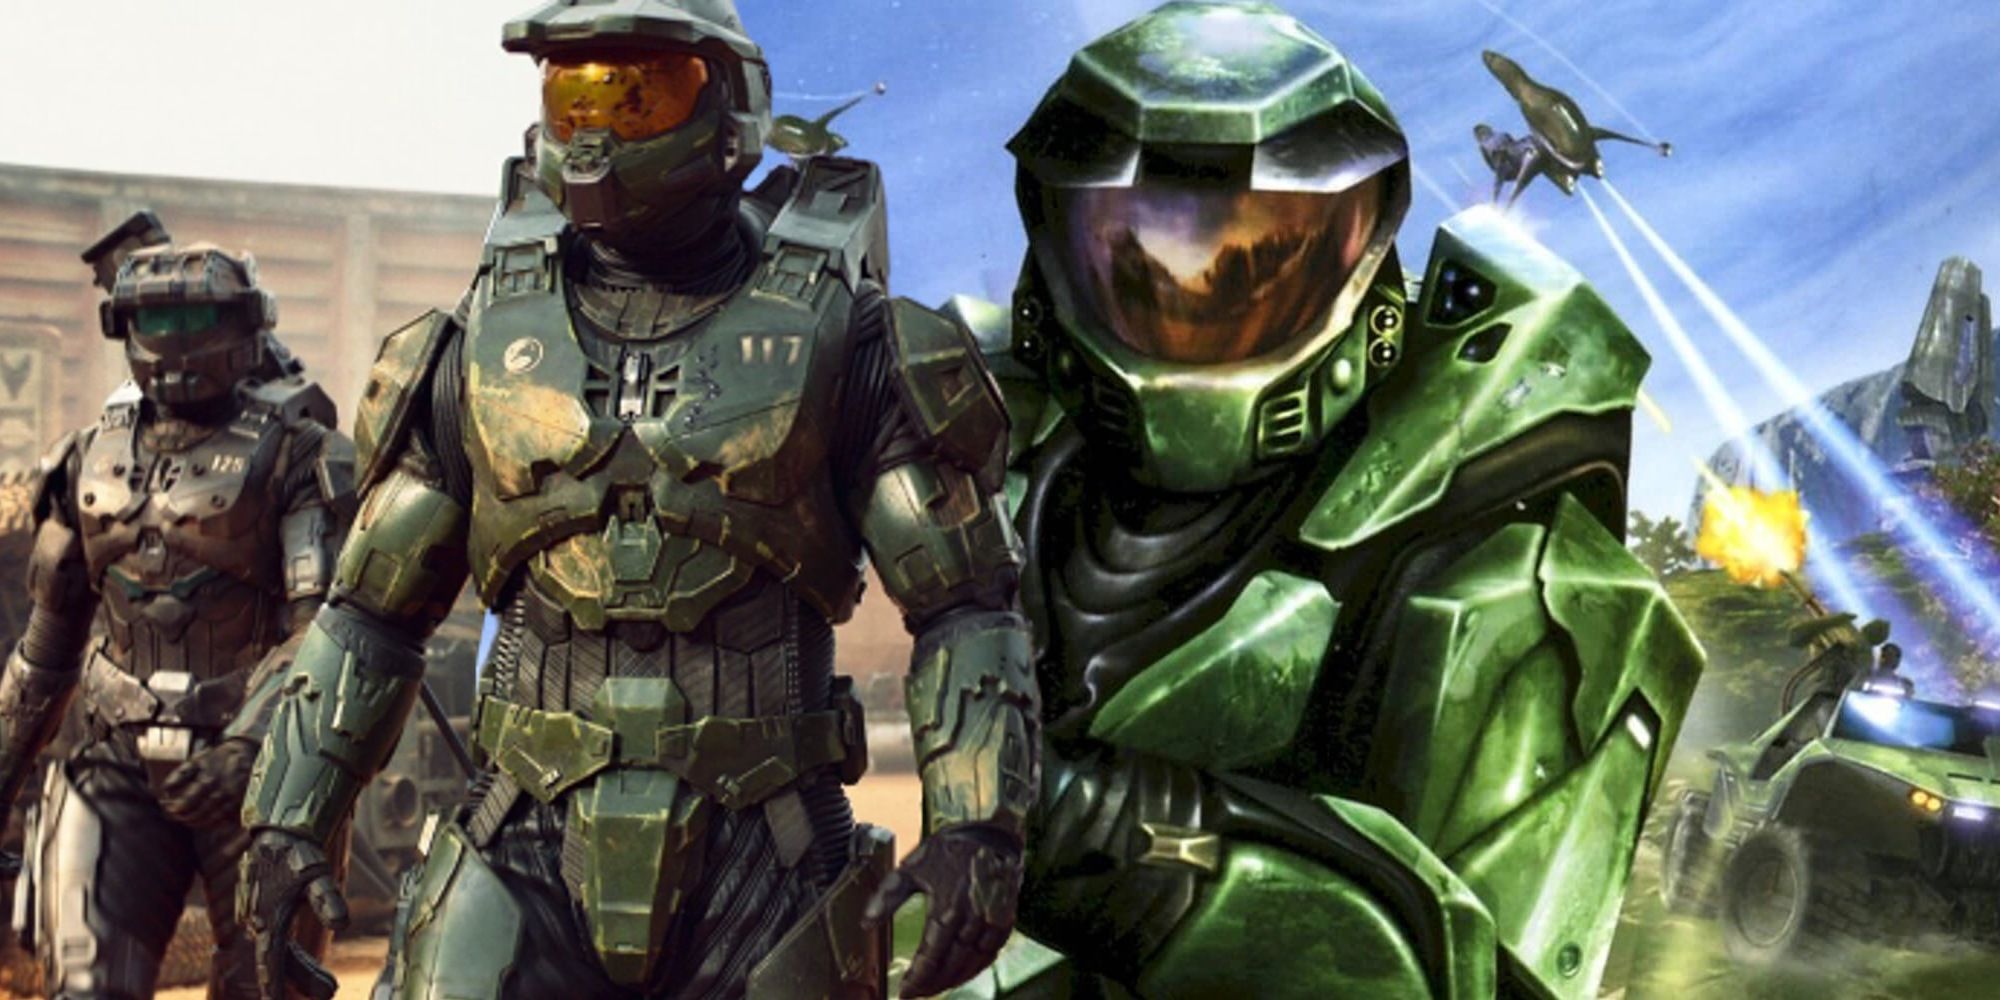 Halo TV Show art and the Halo Combat Evolved video game cover